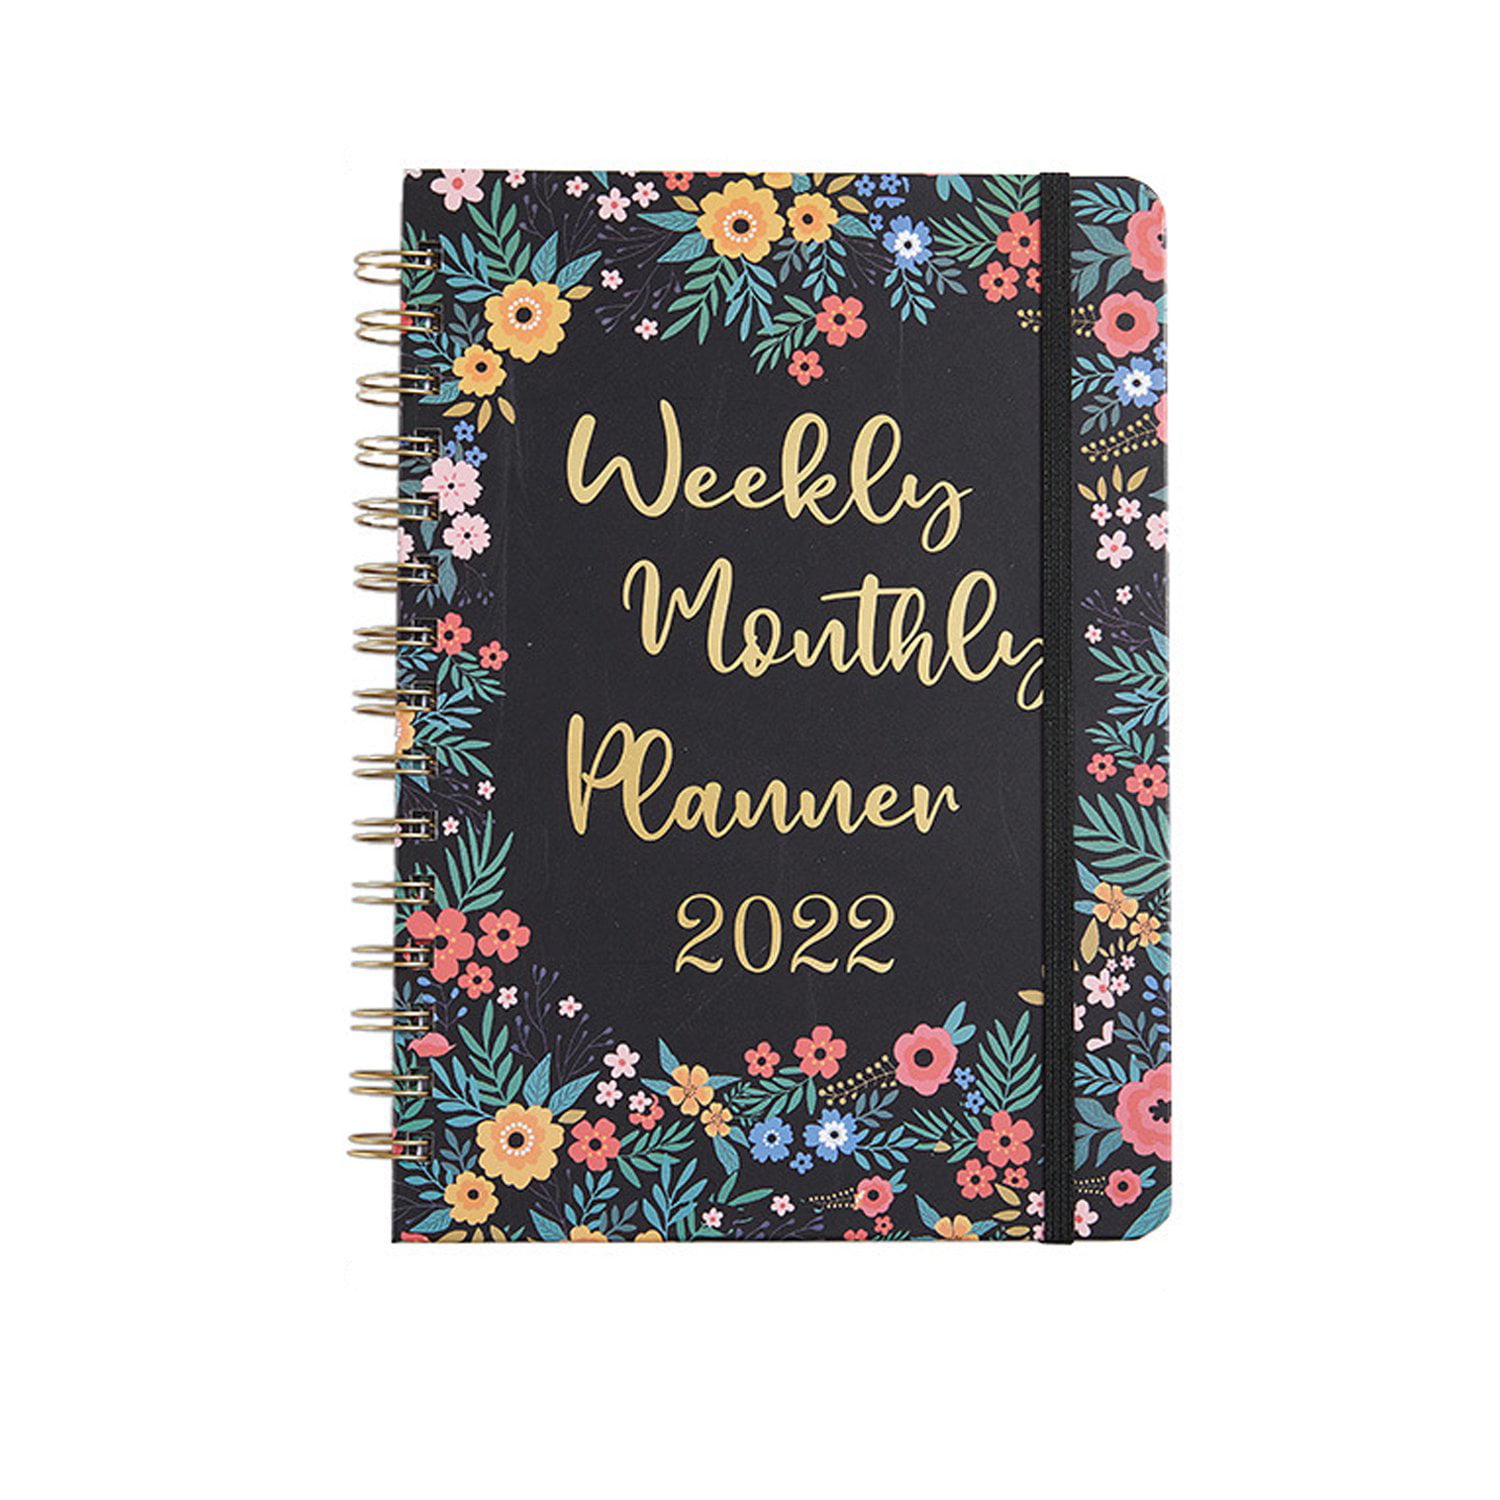 January December 2022 Inner Pocket and Premium Thick Paper Elastic Closure 2022 Planner Weekly and Monthly with Flexible Hard Cover 2022 Agenda with Twin-wire Binding 8.4 x 6.3 2022 Planner 